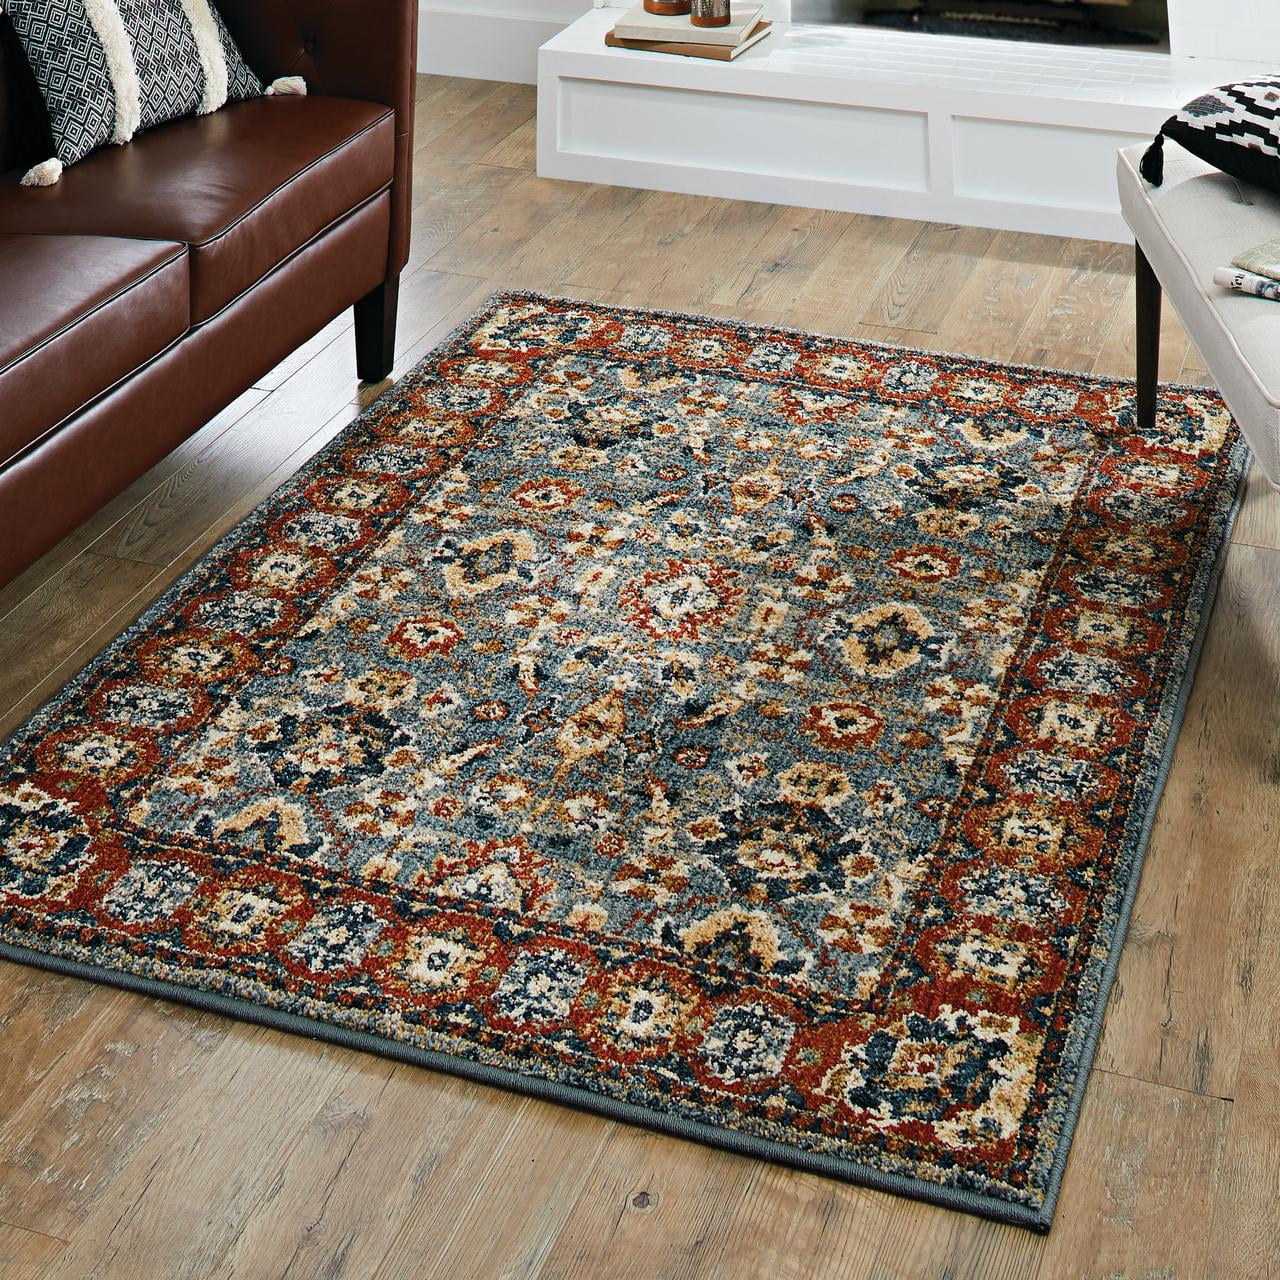 Persain style Carpet Living room rugs Runners high and thick quality all sizes 